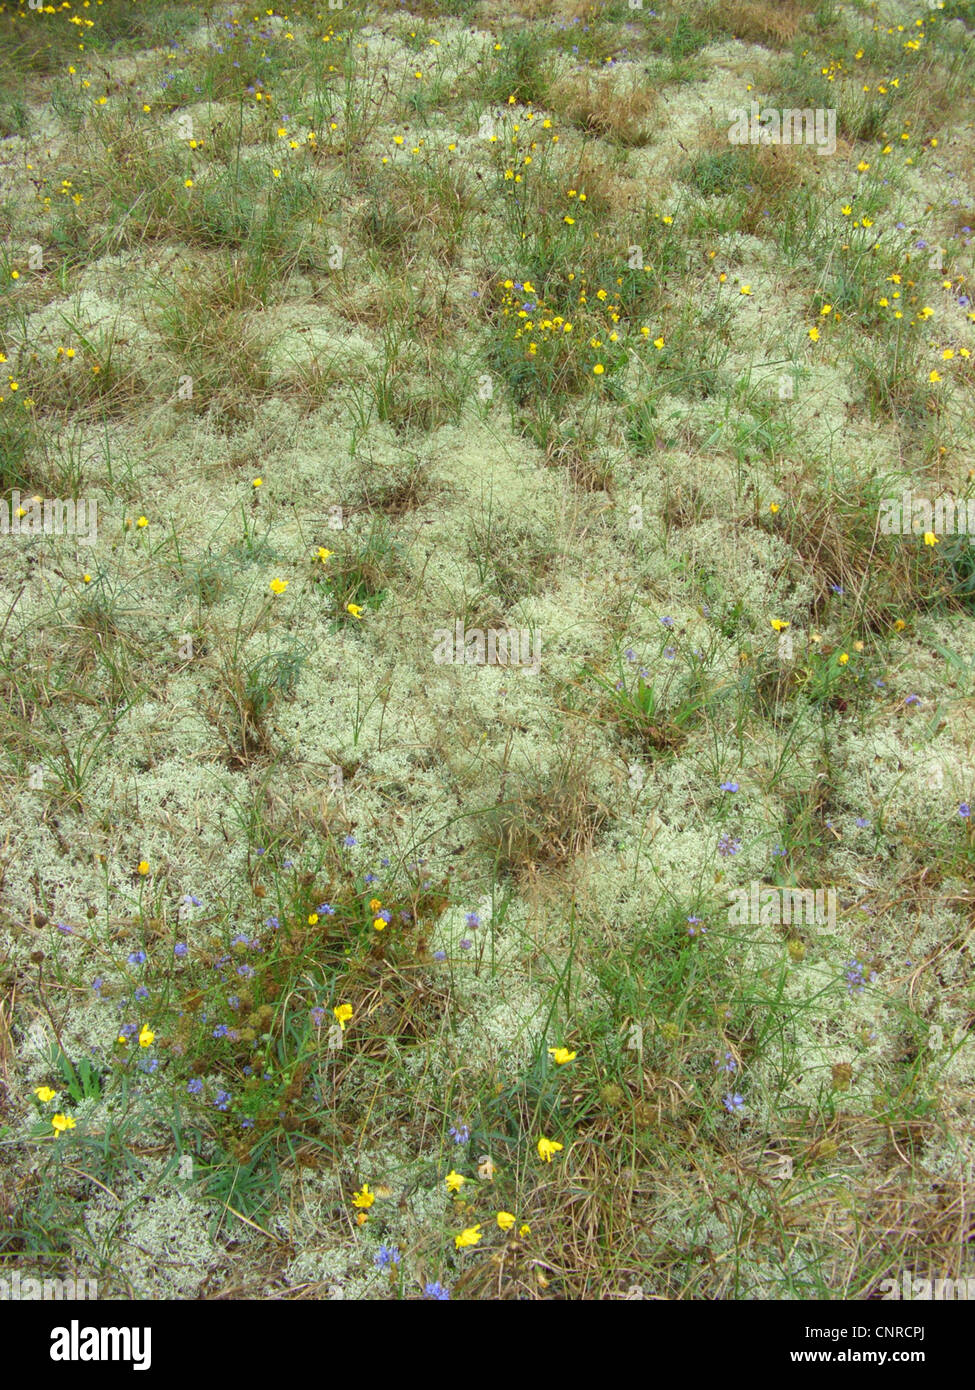 cup lichen (Cladonia arbuscula), growing on sand dunes, with Hieracium umbellatum and Jasione montana, Germany, Lower Saxony, NSG Elbtalduenen Stock Photo